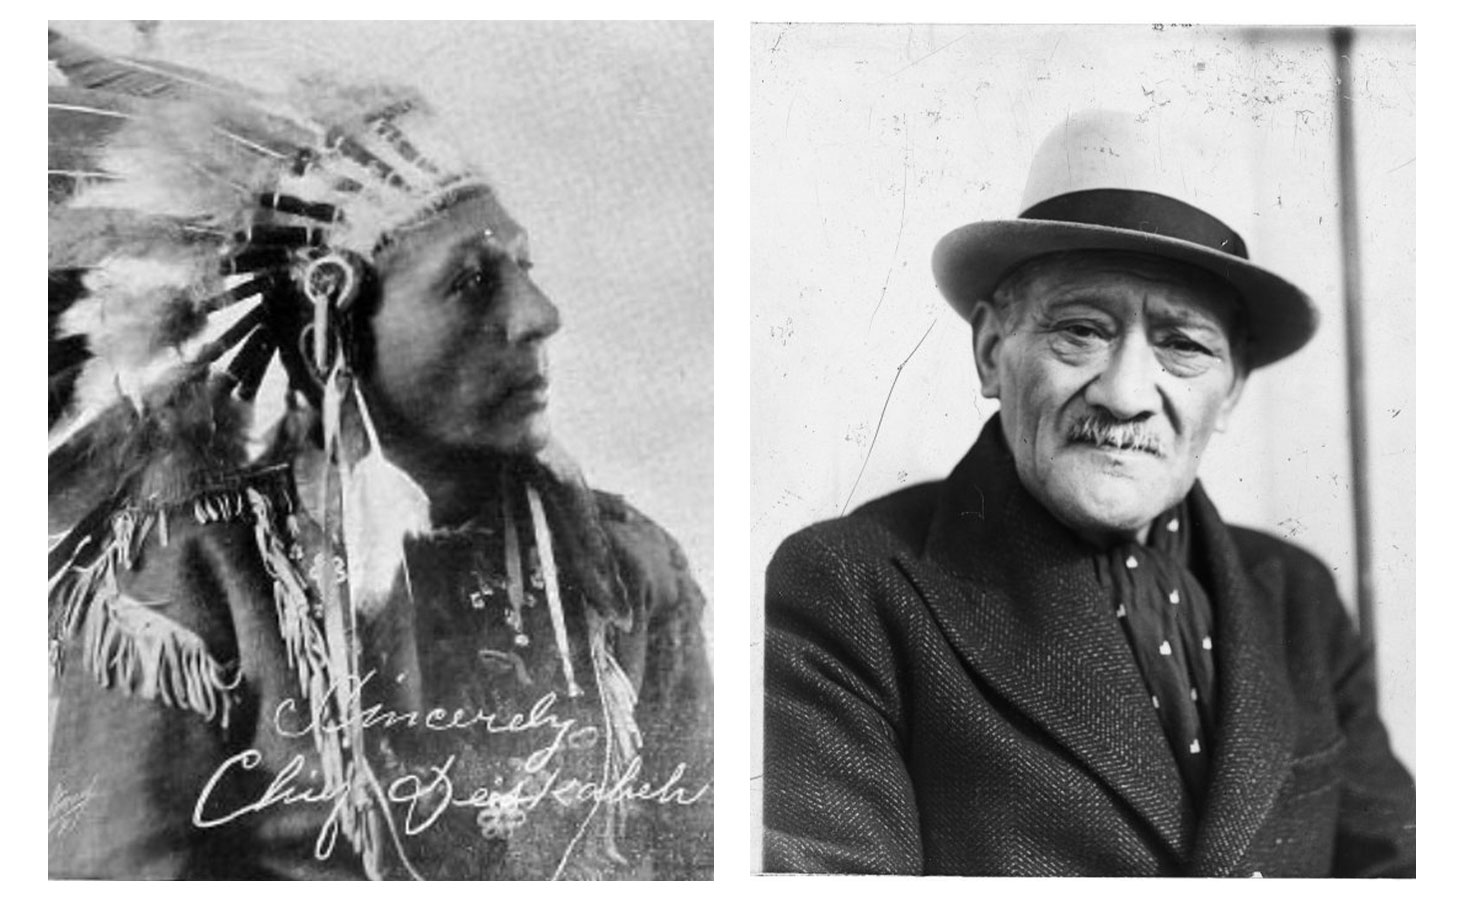 side by side black and white photos of two men, one in a feathered headdress (left) and one in a hat (right)